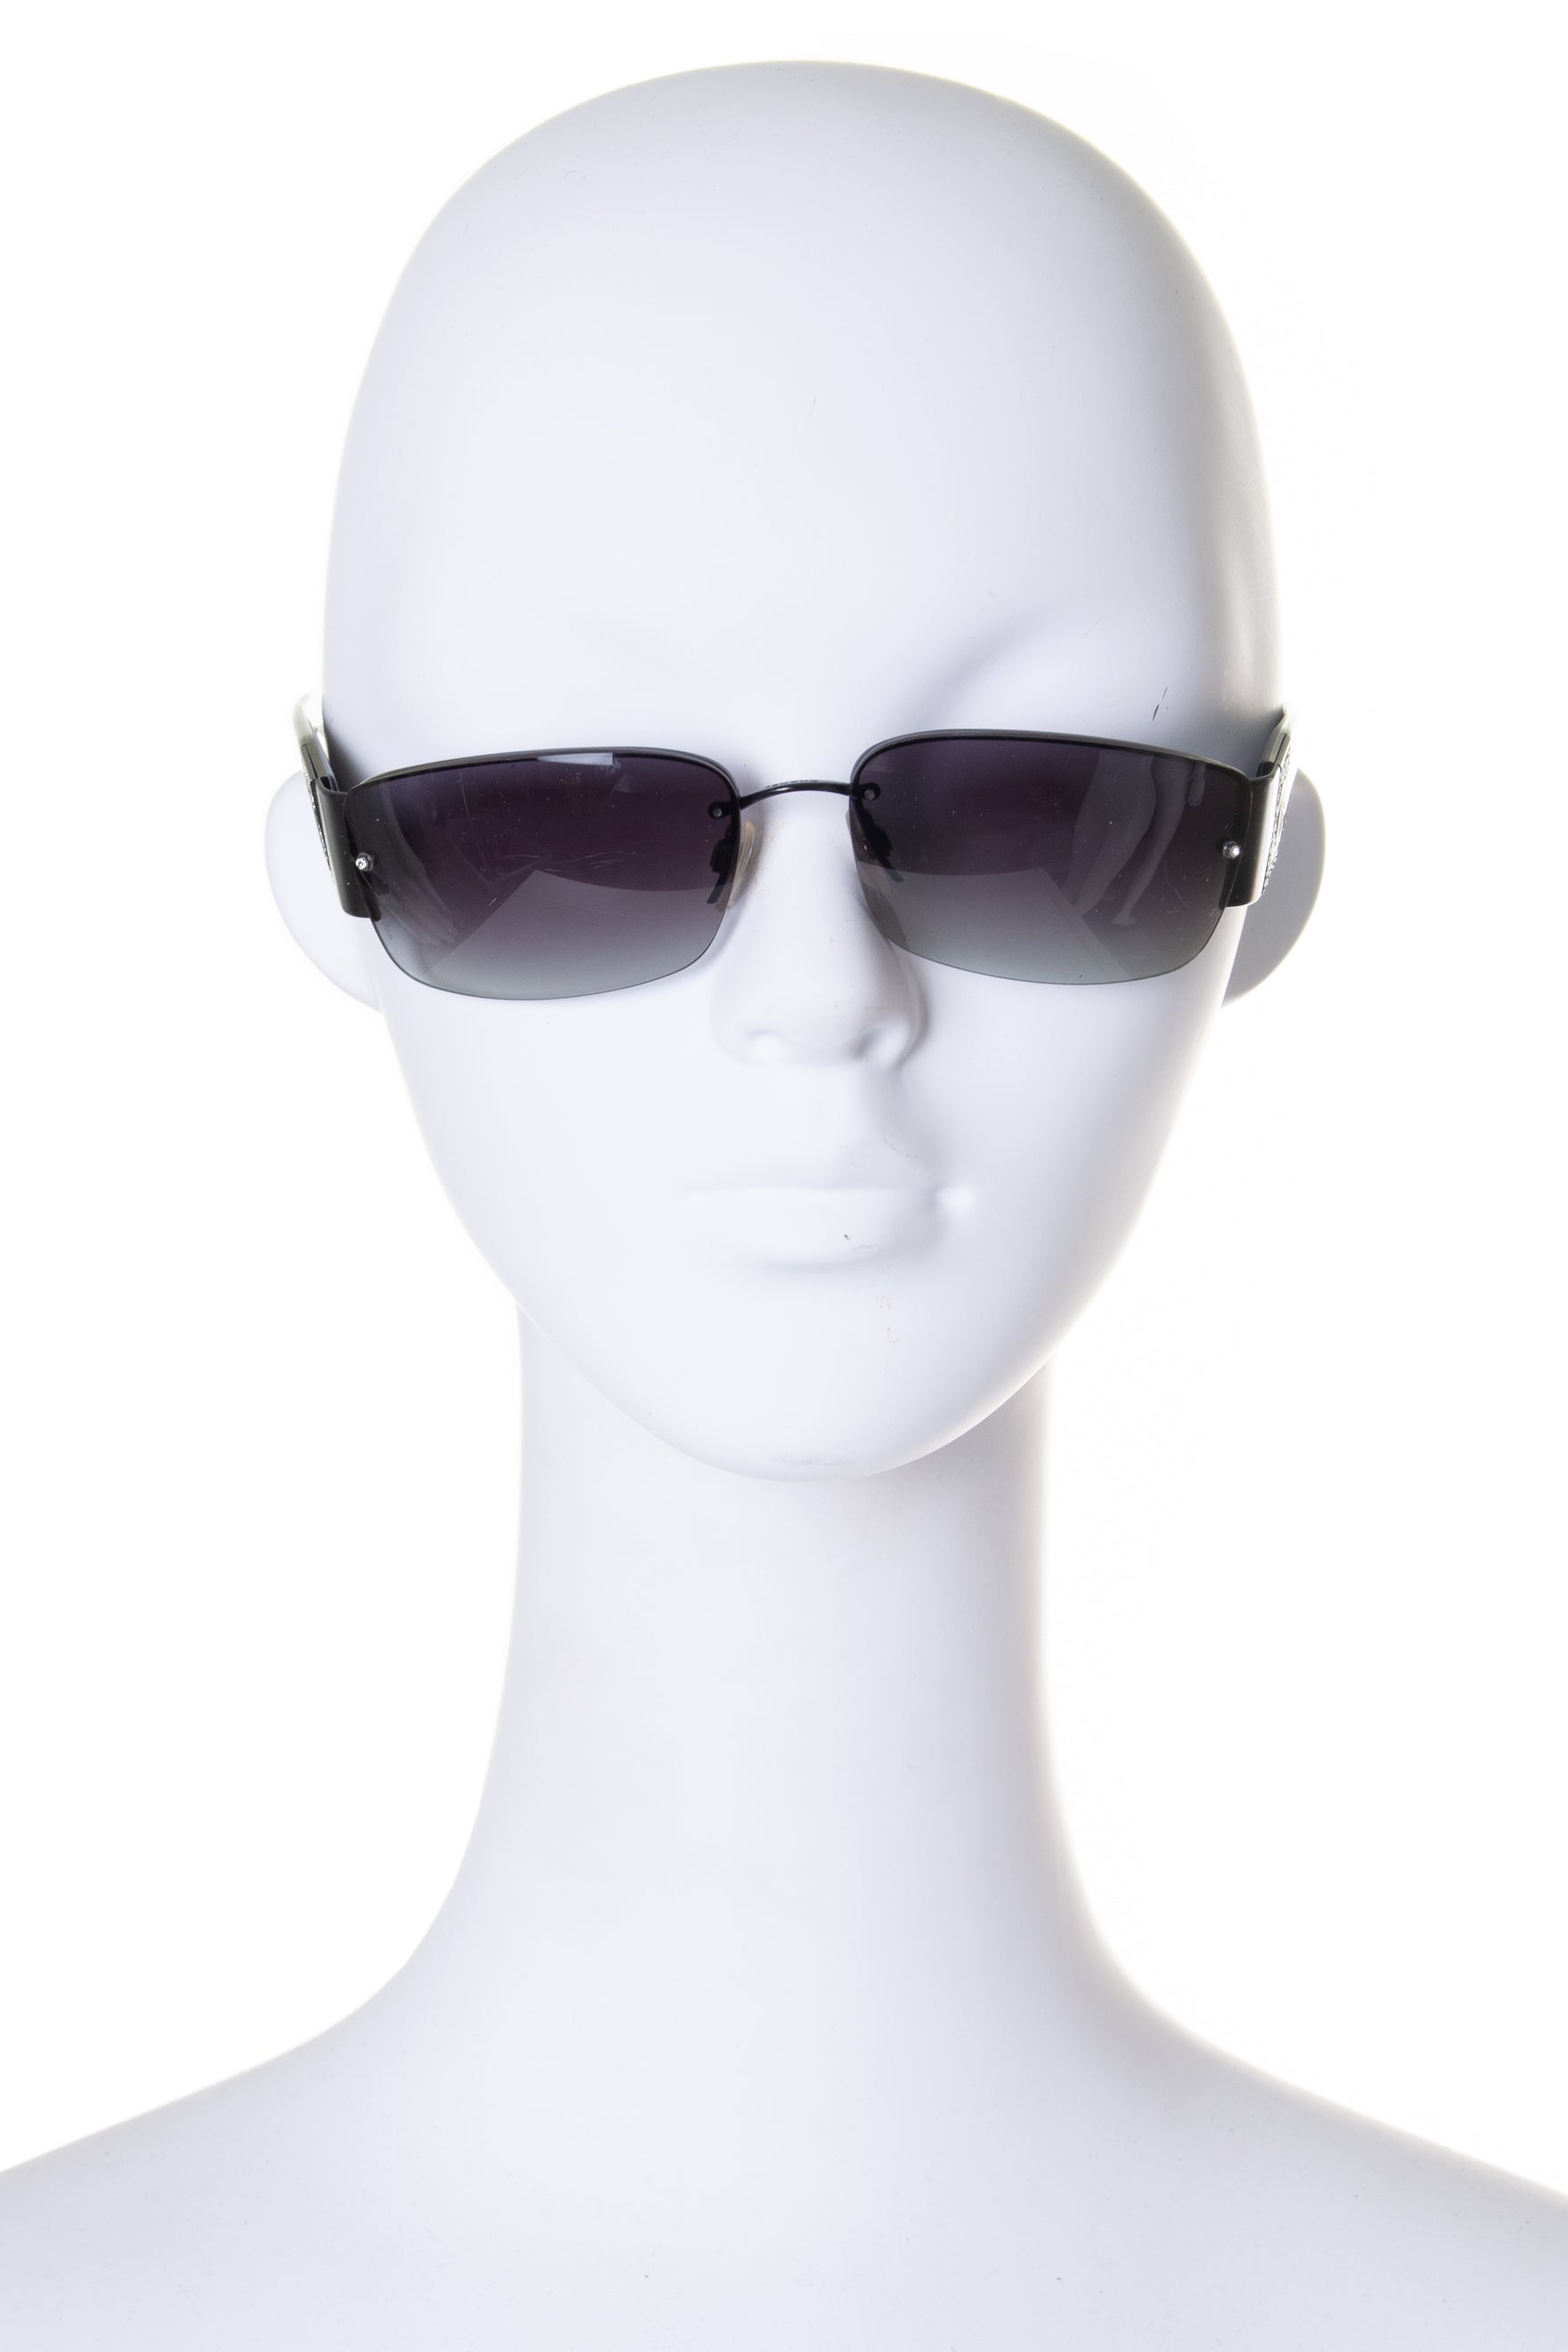 Chanel Sunglasses, 3 Pairs Auction